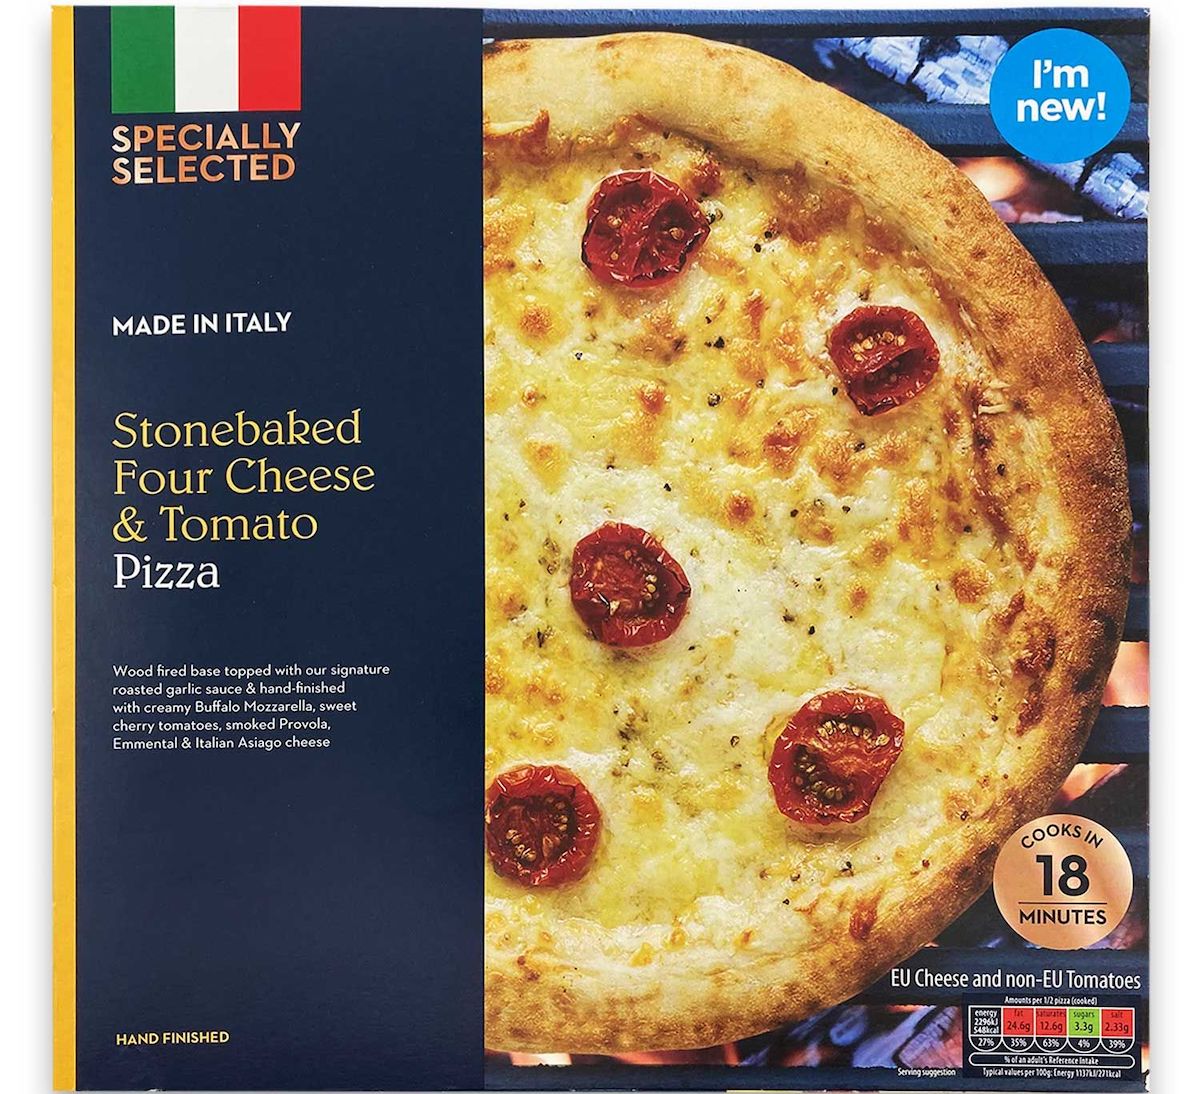 Stonebaked pizza box with three cheese pizza image displayed.